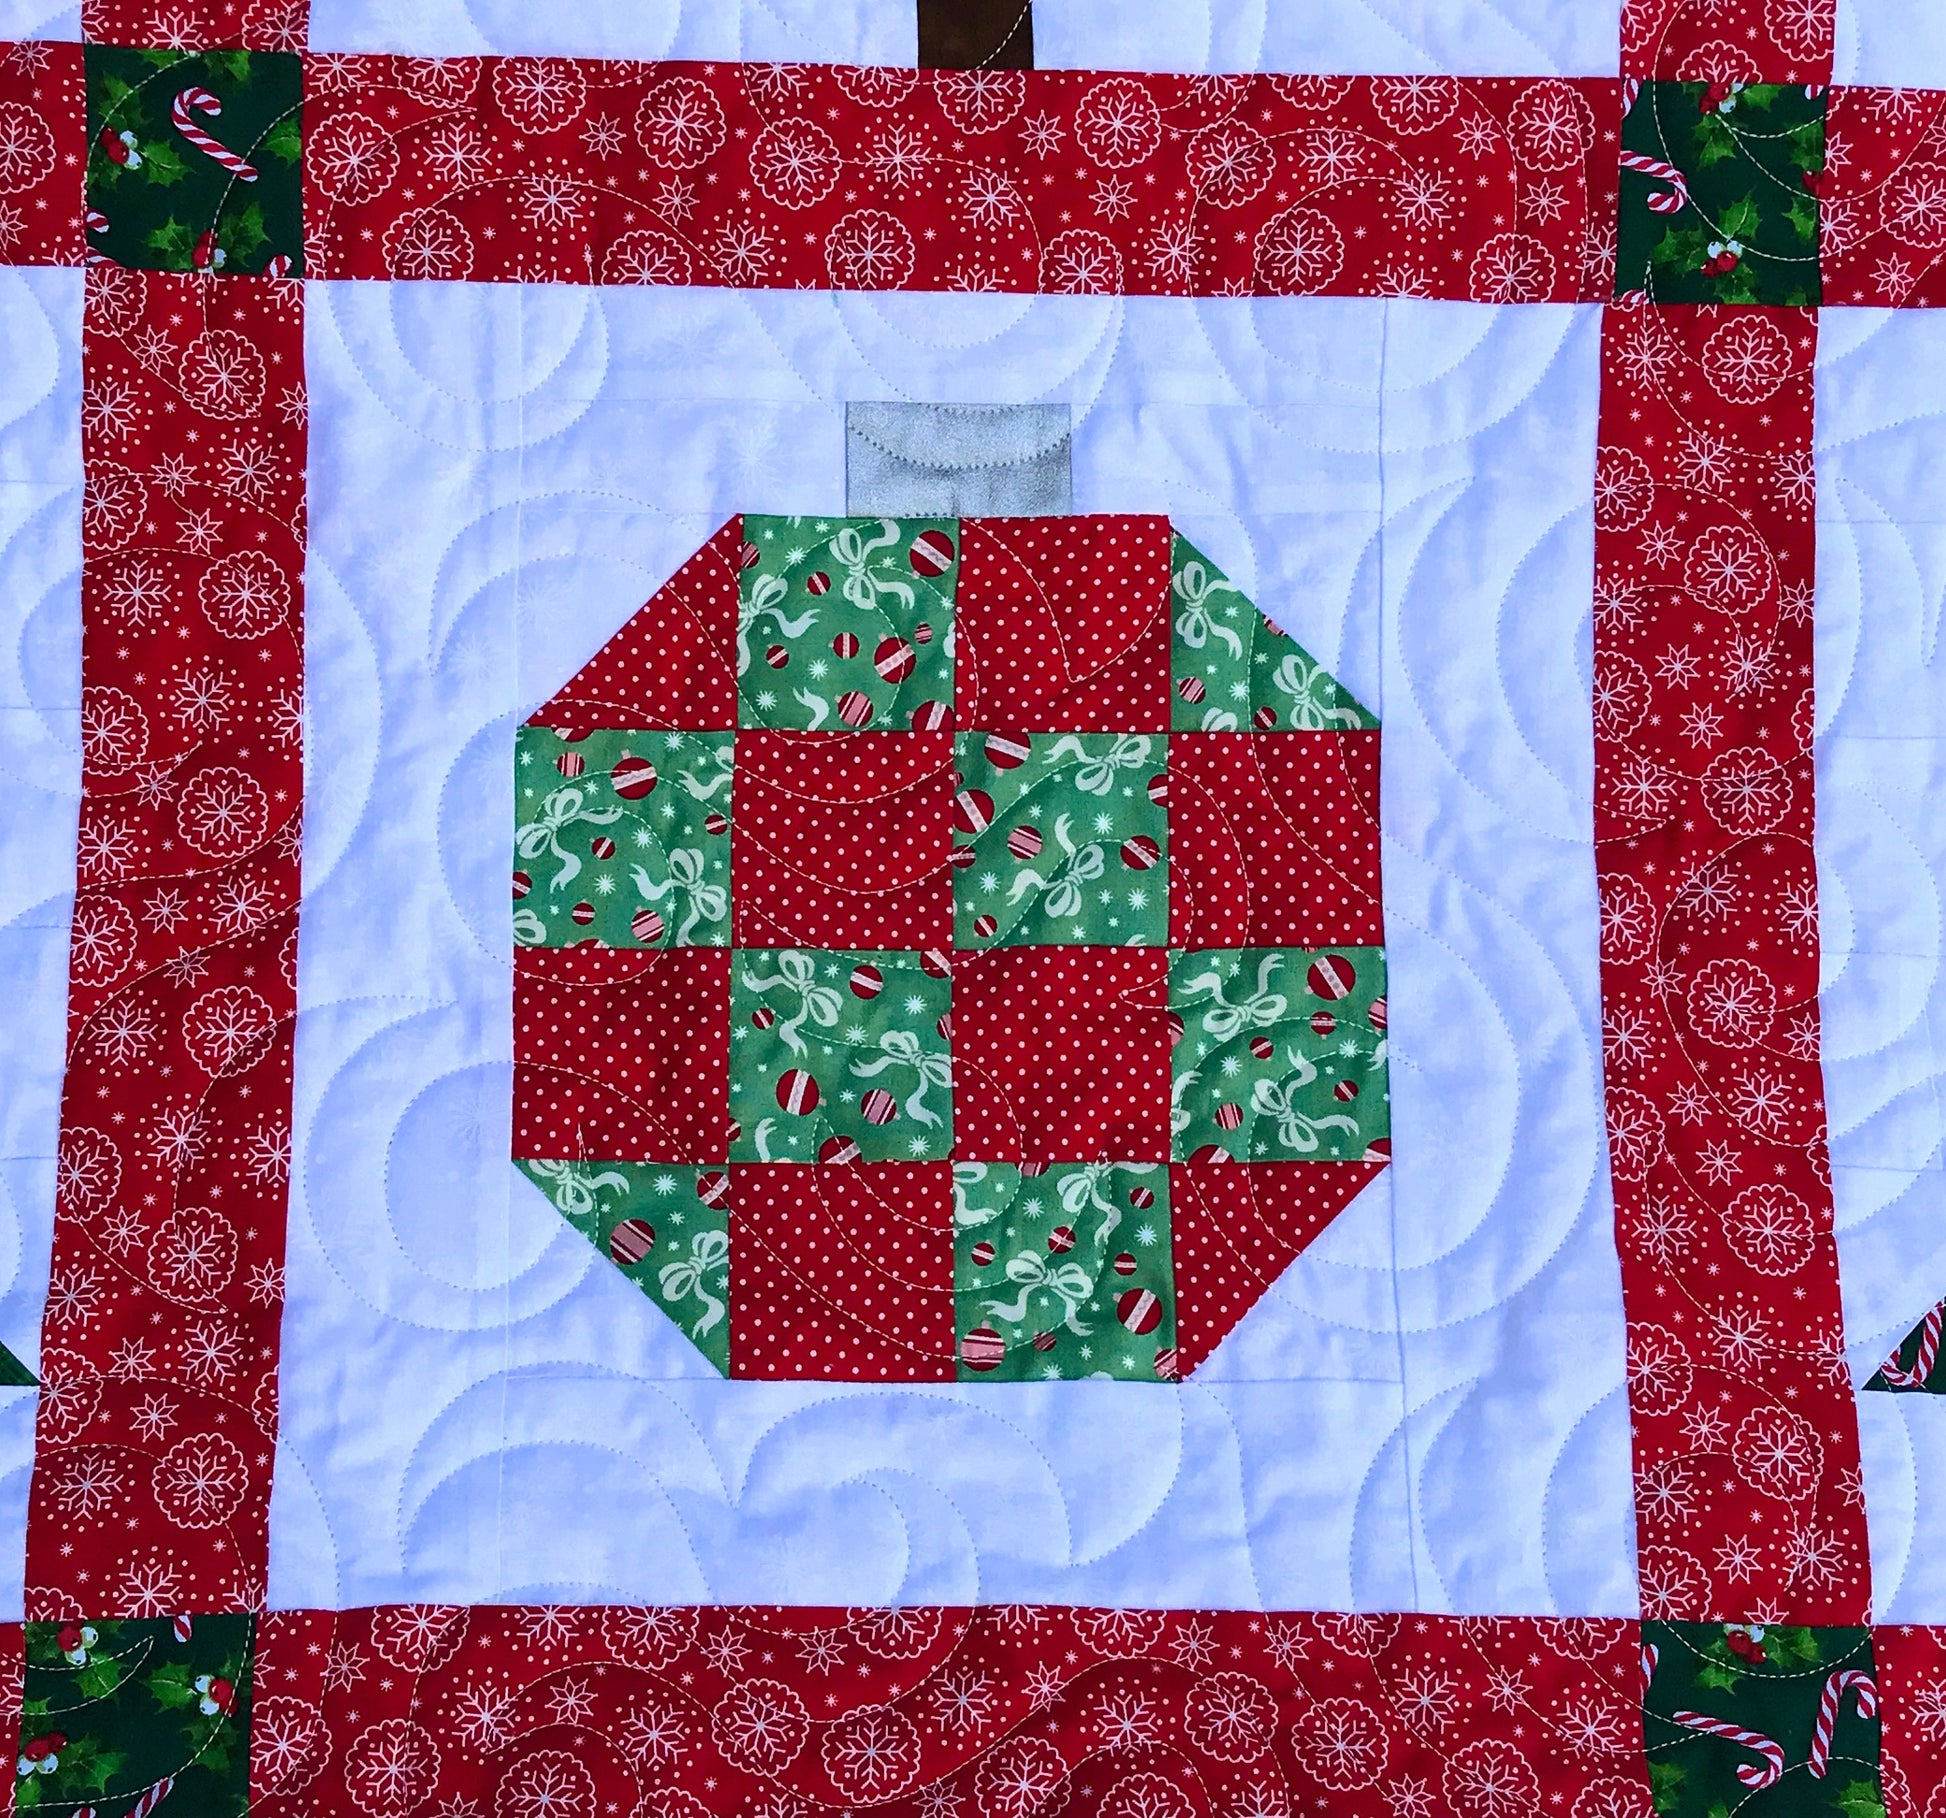 Christmastime quilt pattern with Christmas trees and ornament blocks surrounded by red sashing and a green holly border. Close up of ornament block.